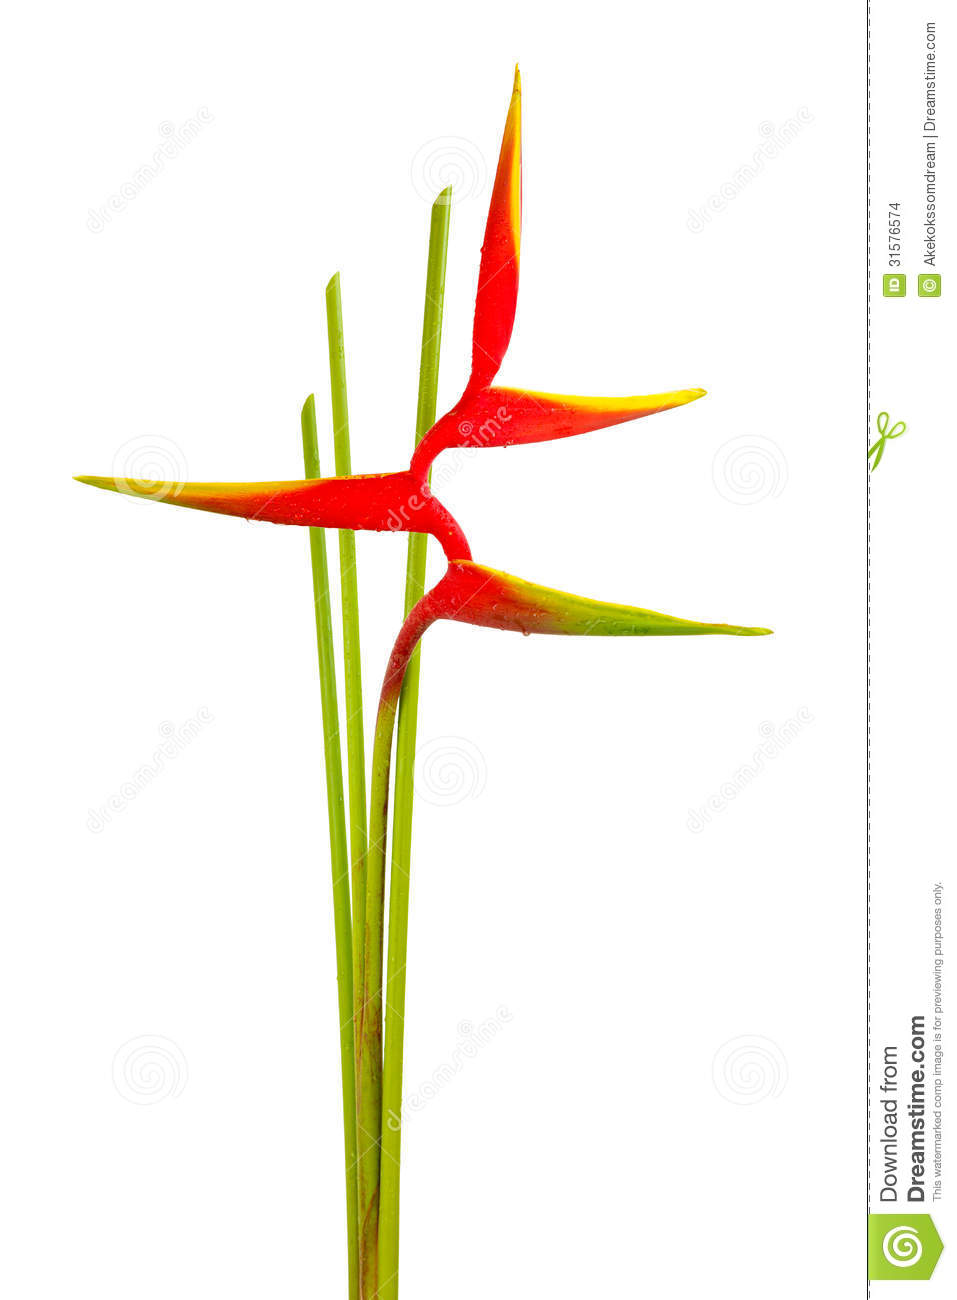 Heliconia clipart #1, Download drawings